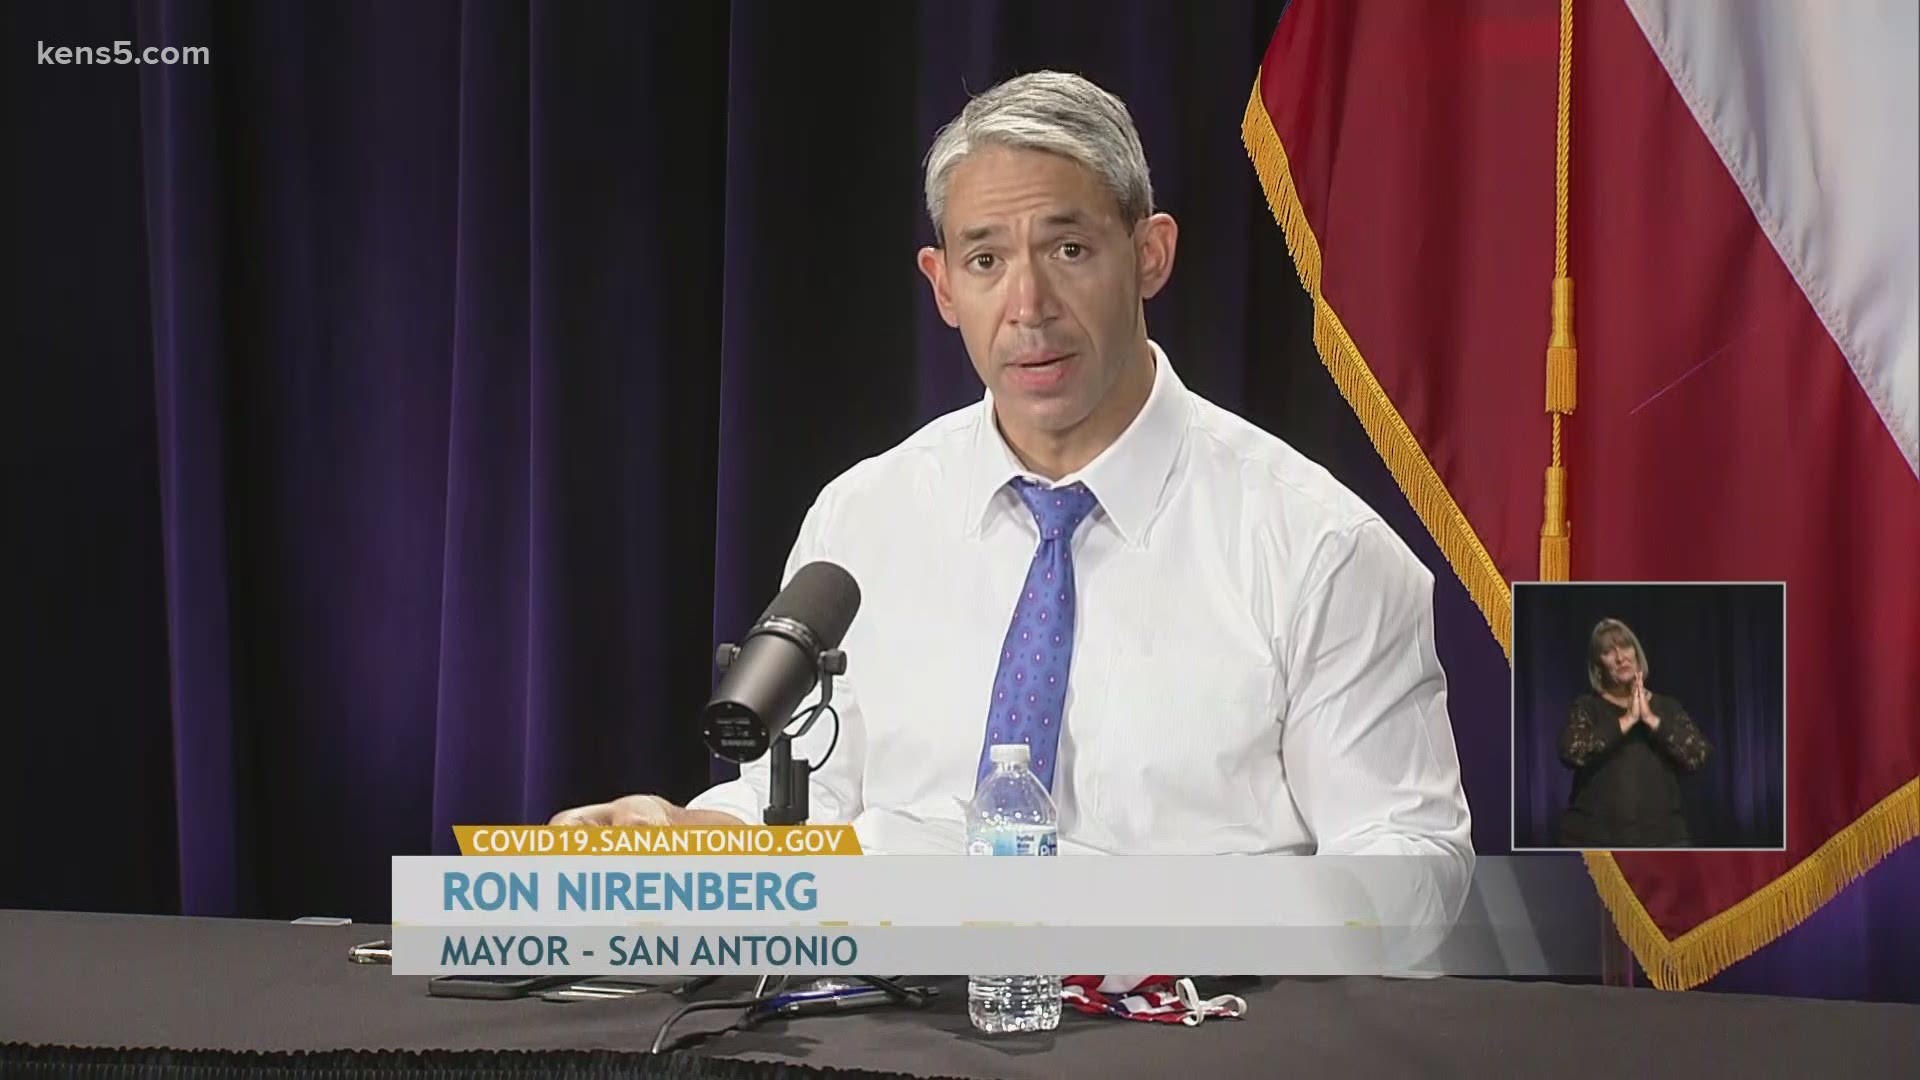 Mayor Nirenberg reported 1,174 additional cases of coronavirus, bringing the county's total to 91,394. 6 new deaths were reported, bringing the death toll to 1,412.